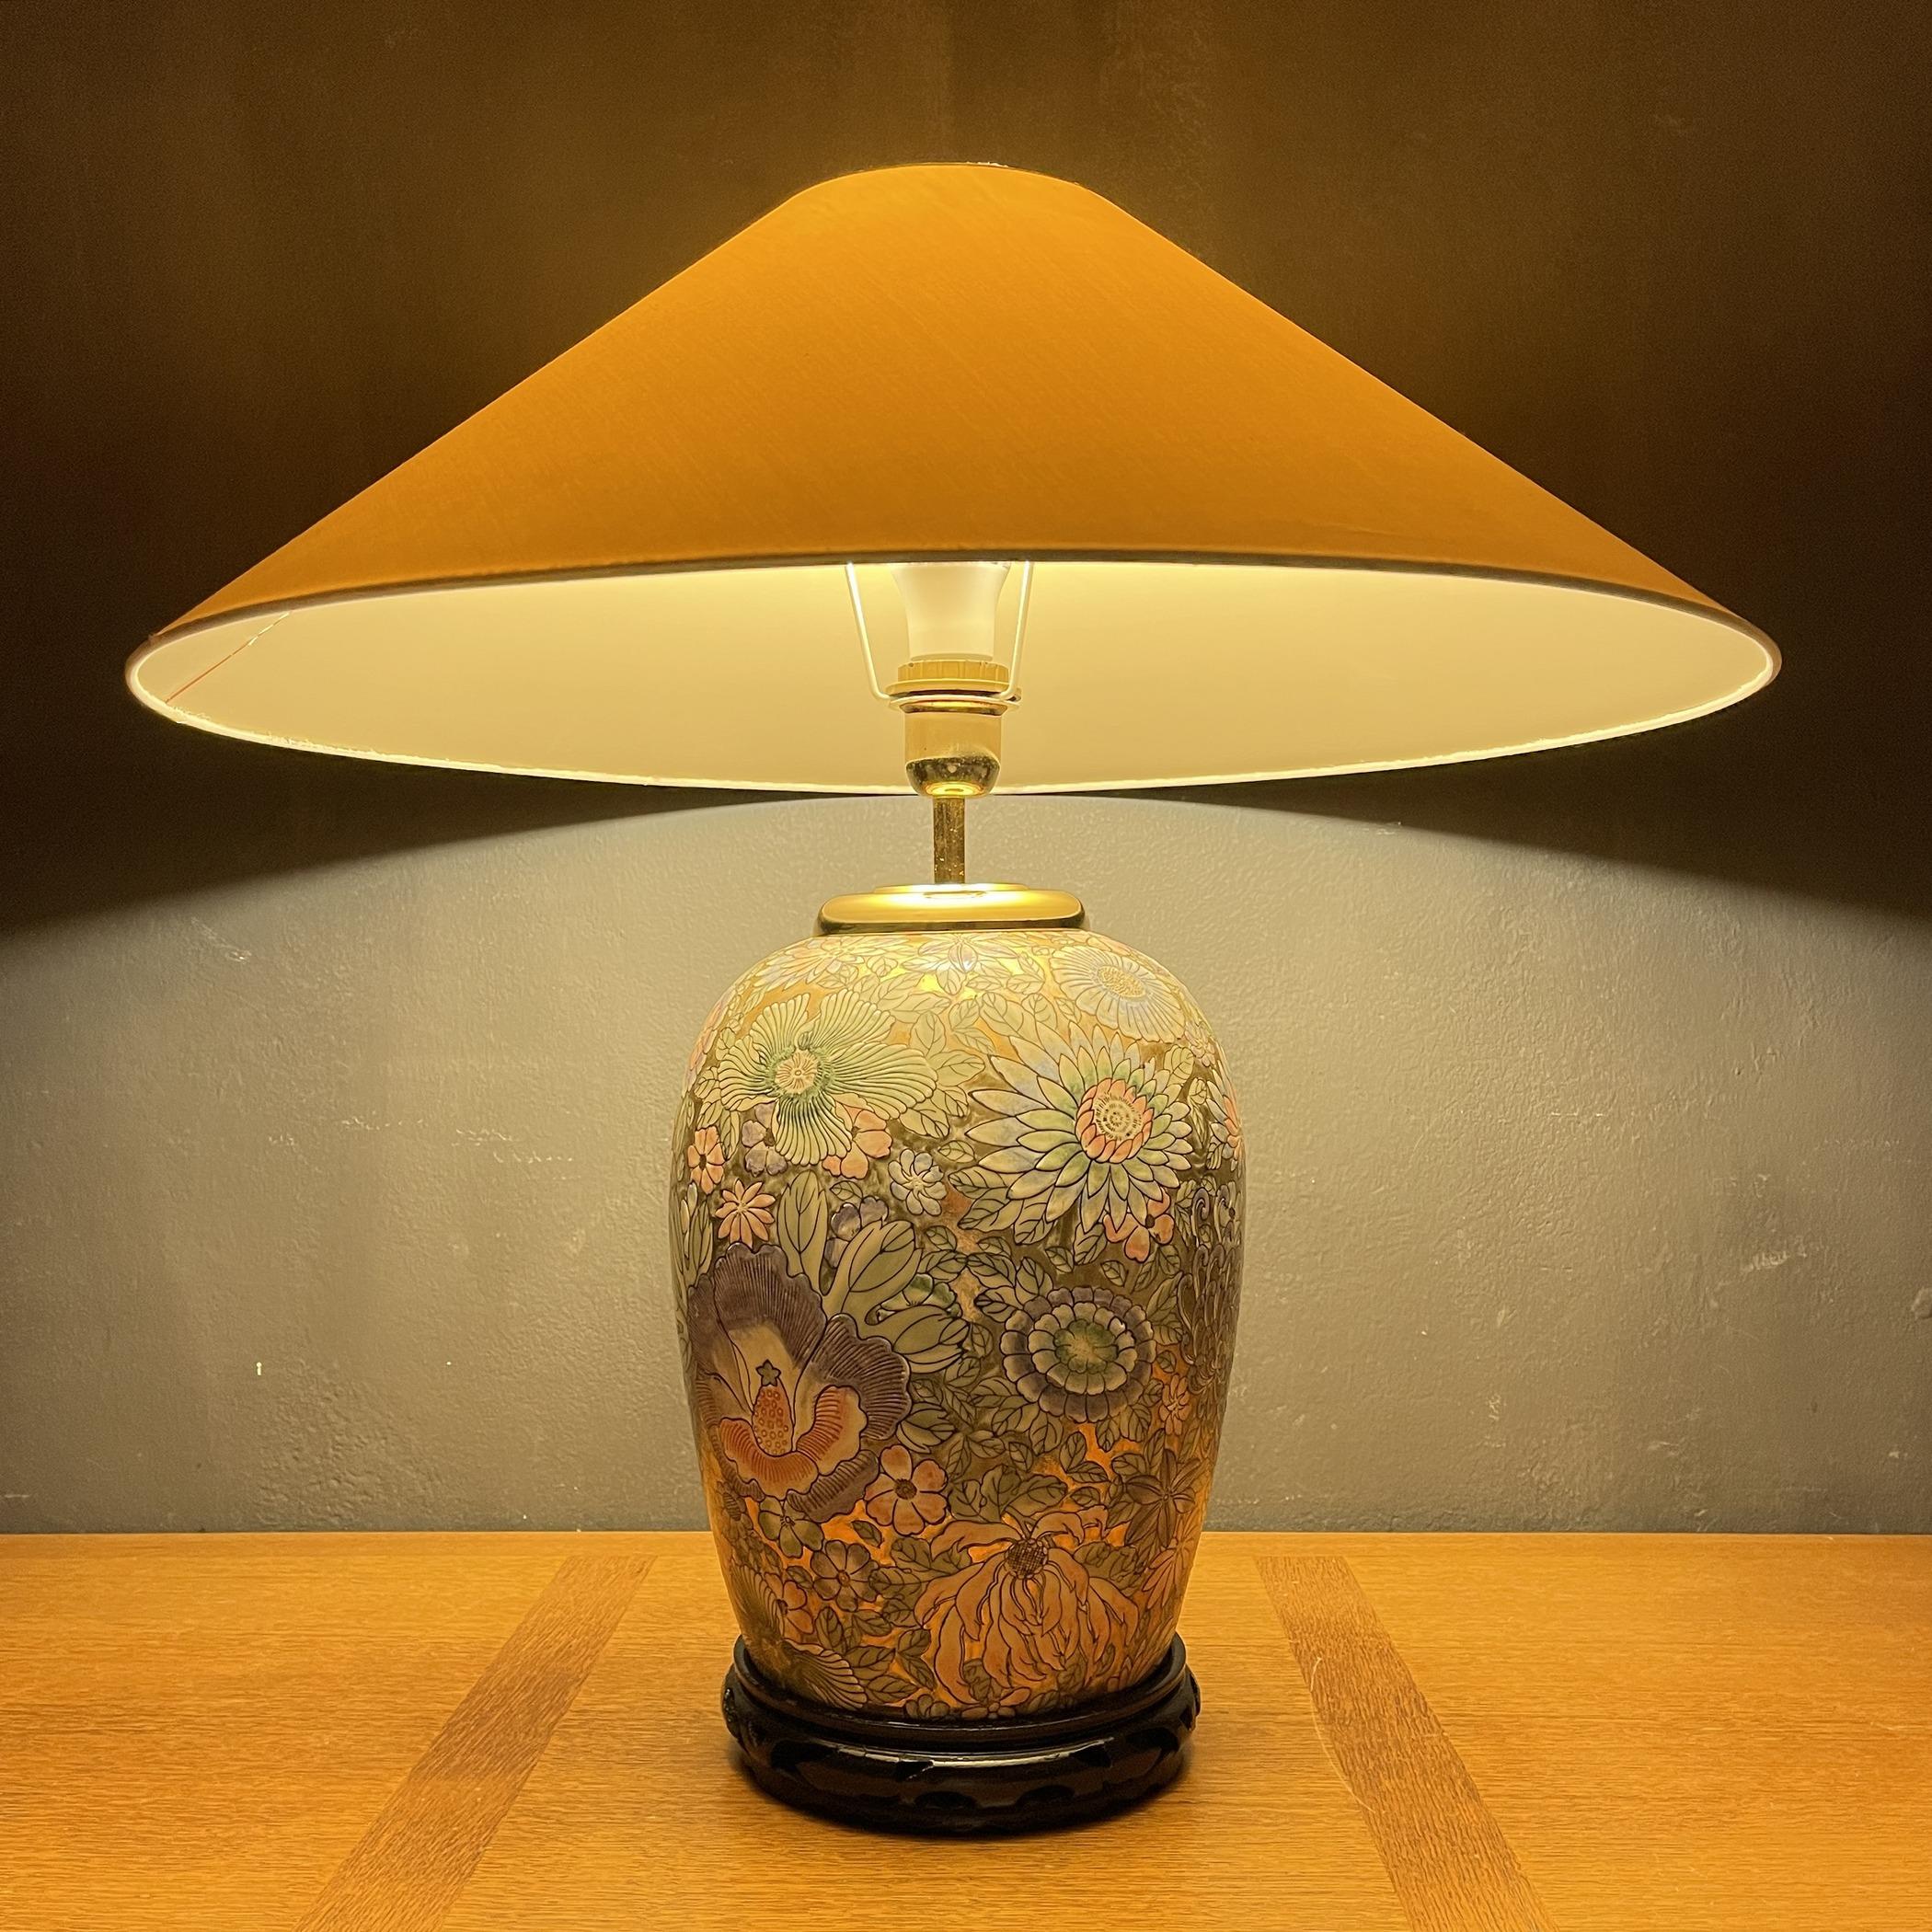 Vintage large ceramic table lamp Flower made in Italy in the 70s. This nice lamp will brighten up your bedroom or living room. Will create comfort and tenderness in it. Requires an E27 bulb. European plug.
Very good vintage condition. There are